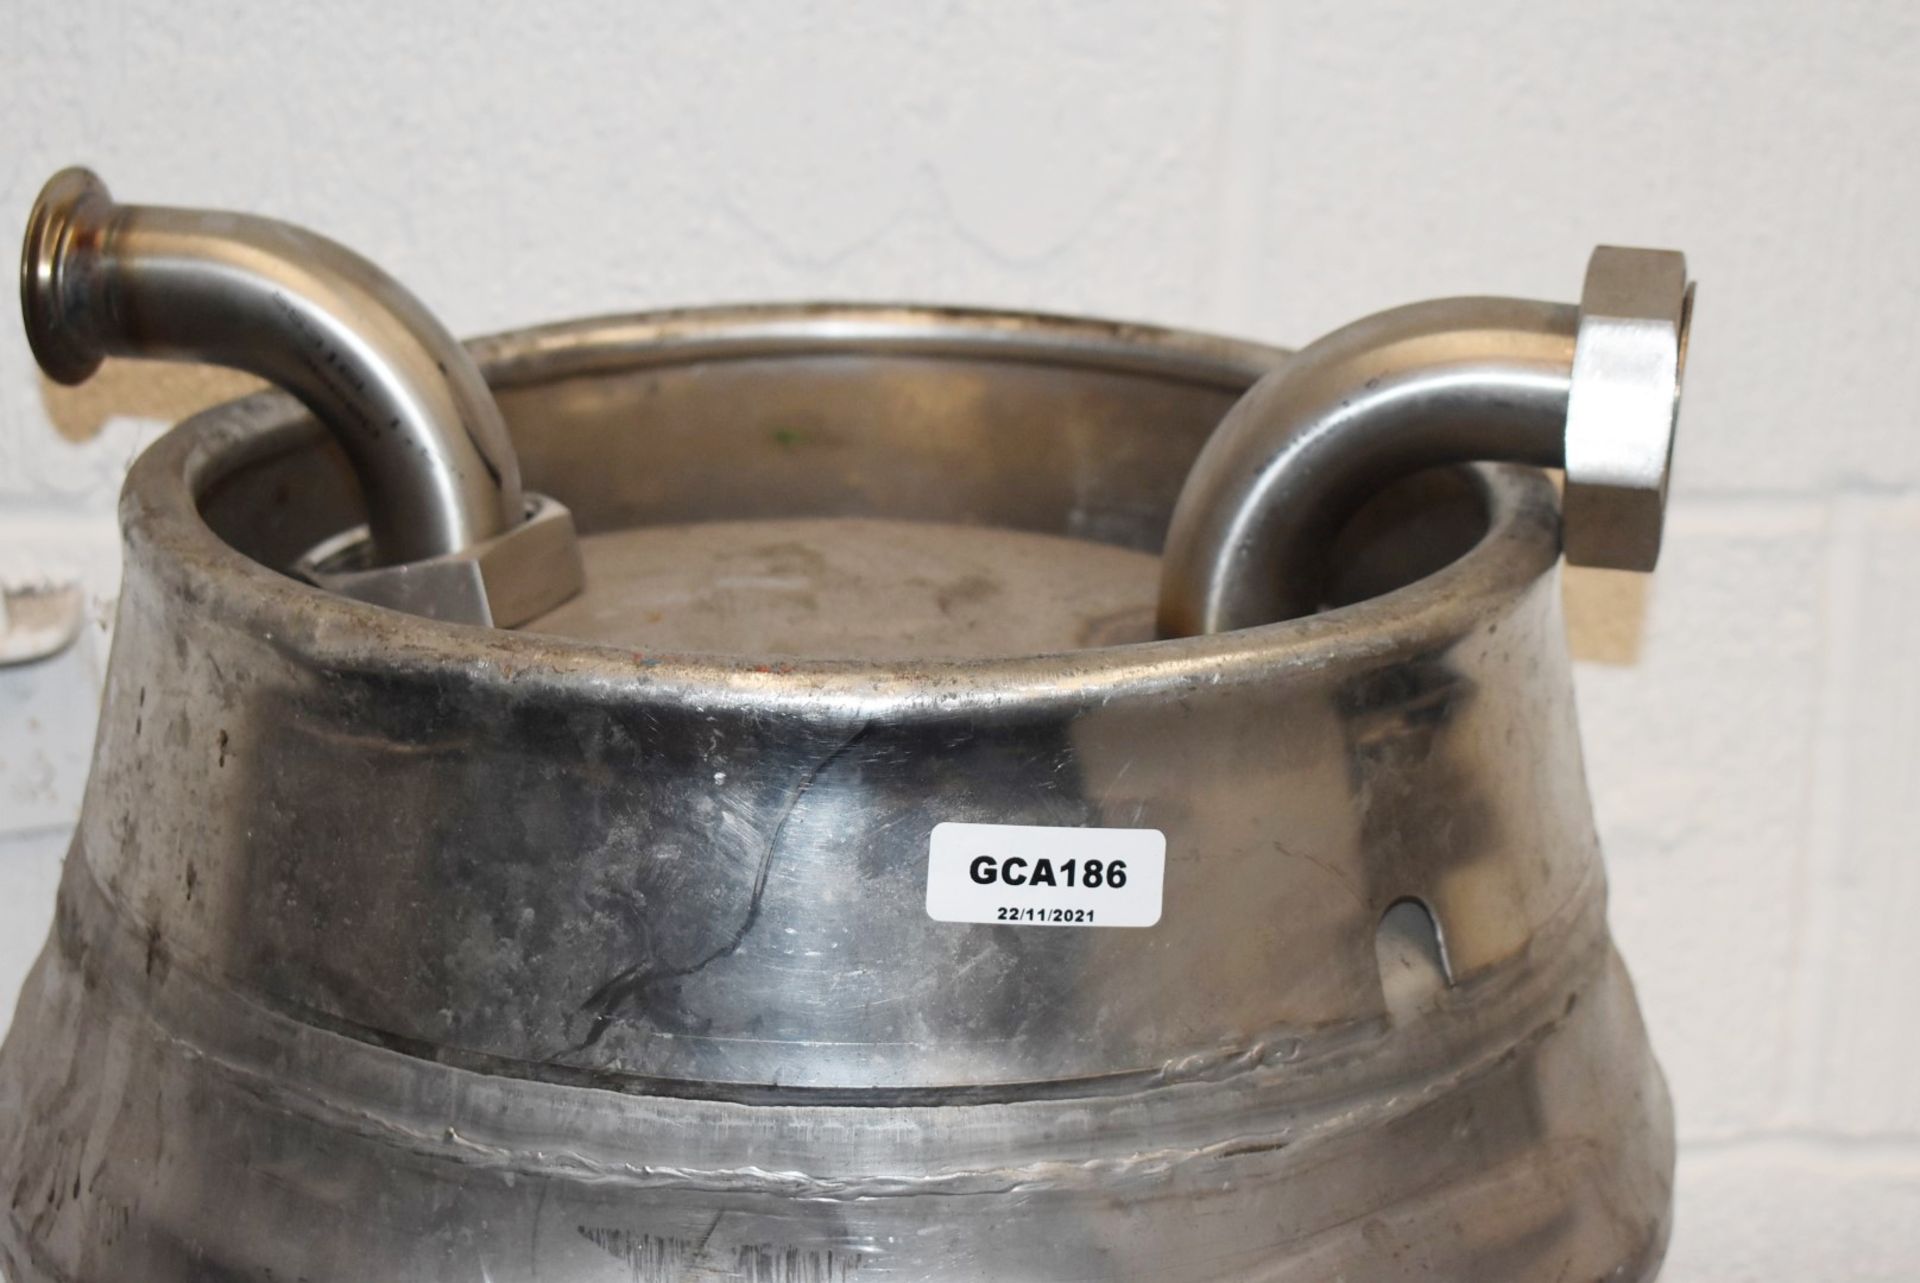 1 x Custom Half Beer Keg With Welded Pipe Fittings - Size: W45 x H37 cms - CL717 - Ref: GCA186 WH5 - - Image 2 of 12